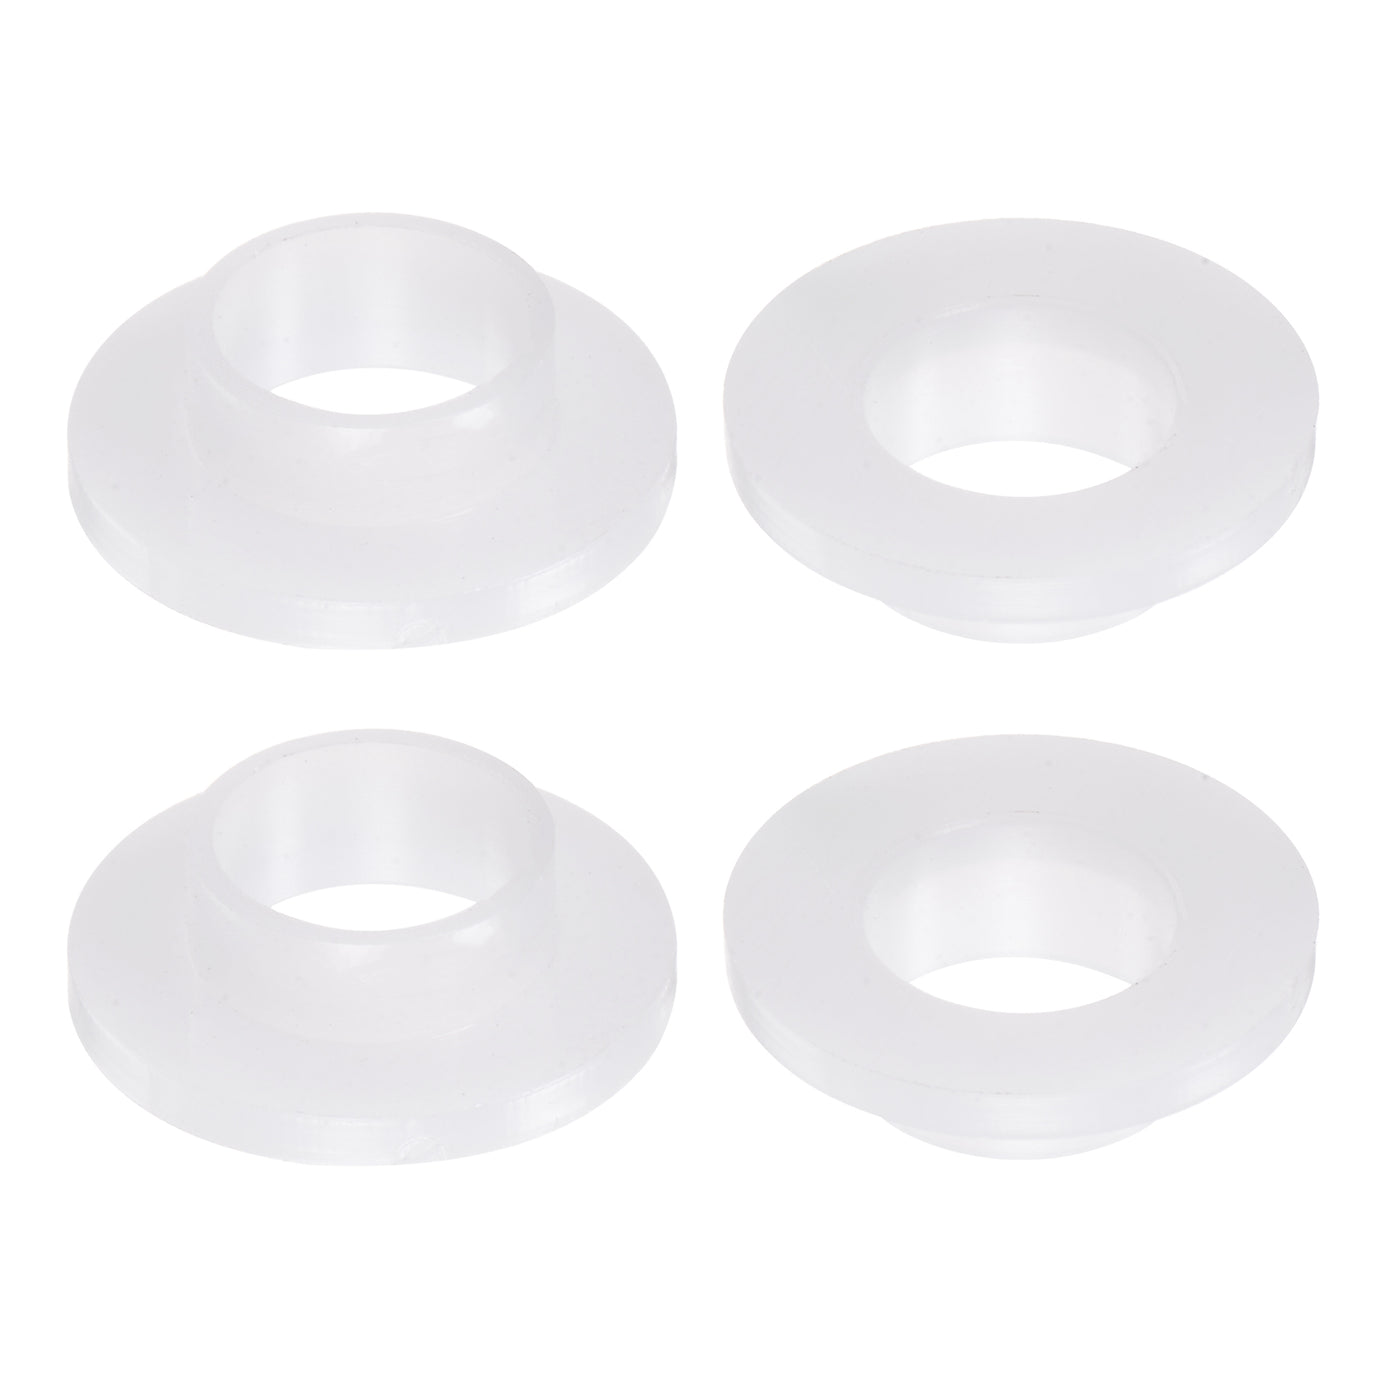 uxcell Uxcell 4pcs Flanged Sleeve Bearings 10.1mm ID 12mm OD 6mm Length Nylon Bushings, White